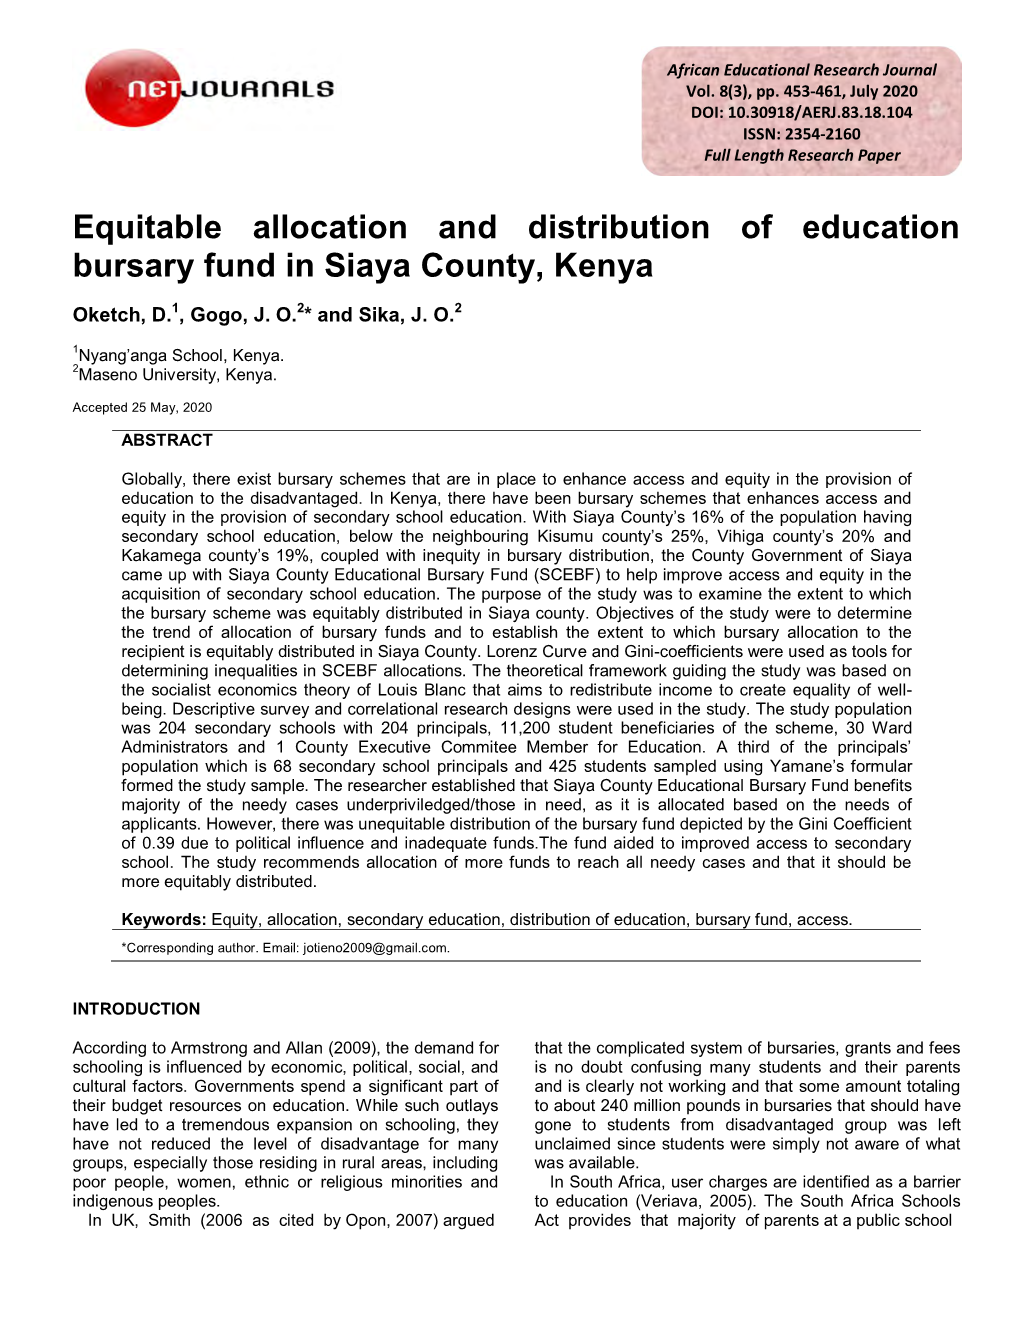 Equitable Allocation and Distribution of Education Bursary Fund in Siaya County, Kenya